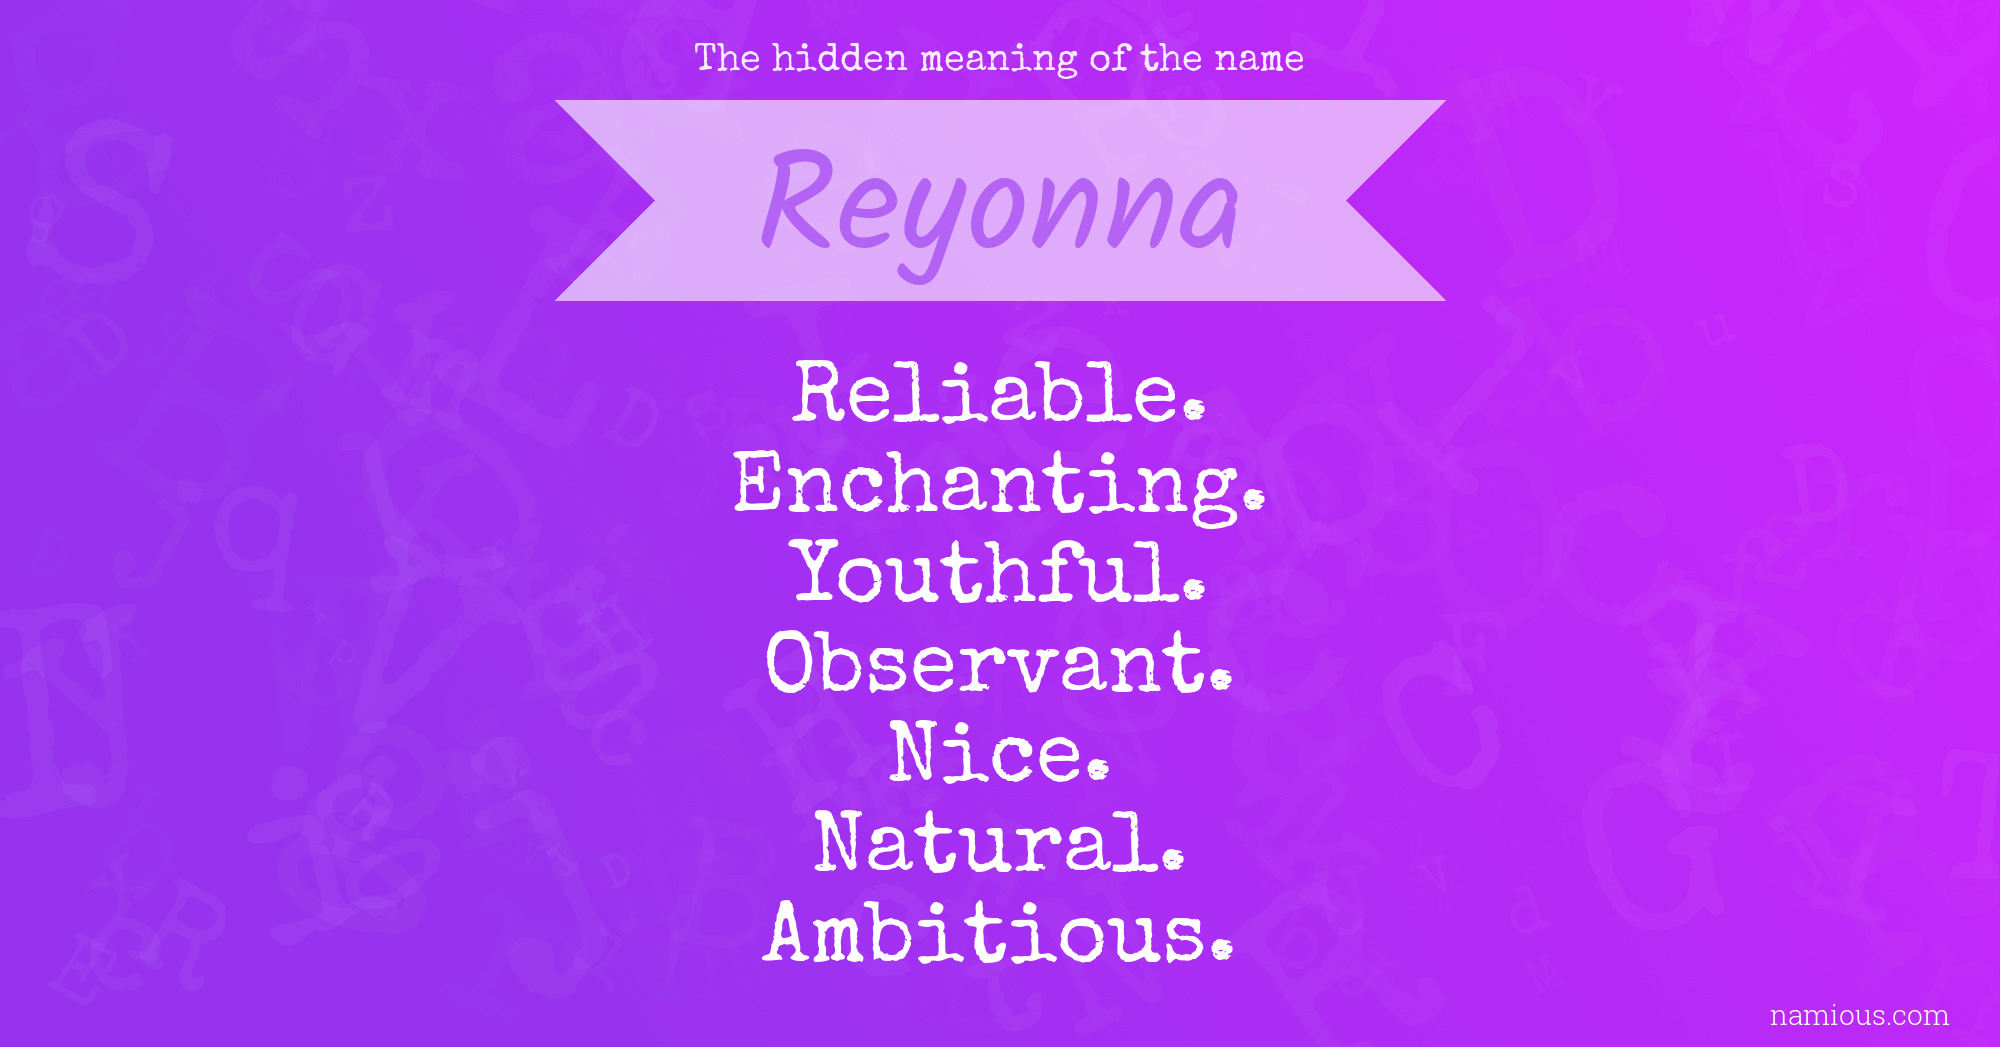 The hidden meaning of the name Reyonna